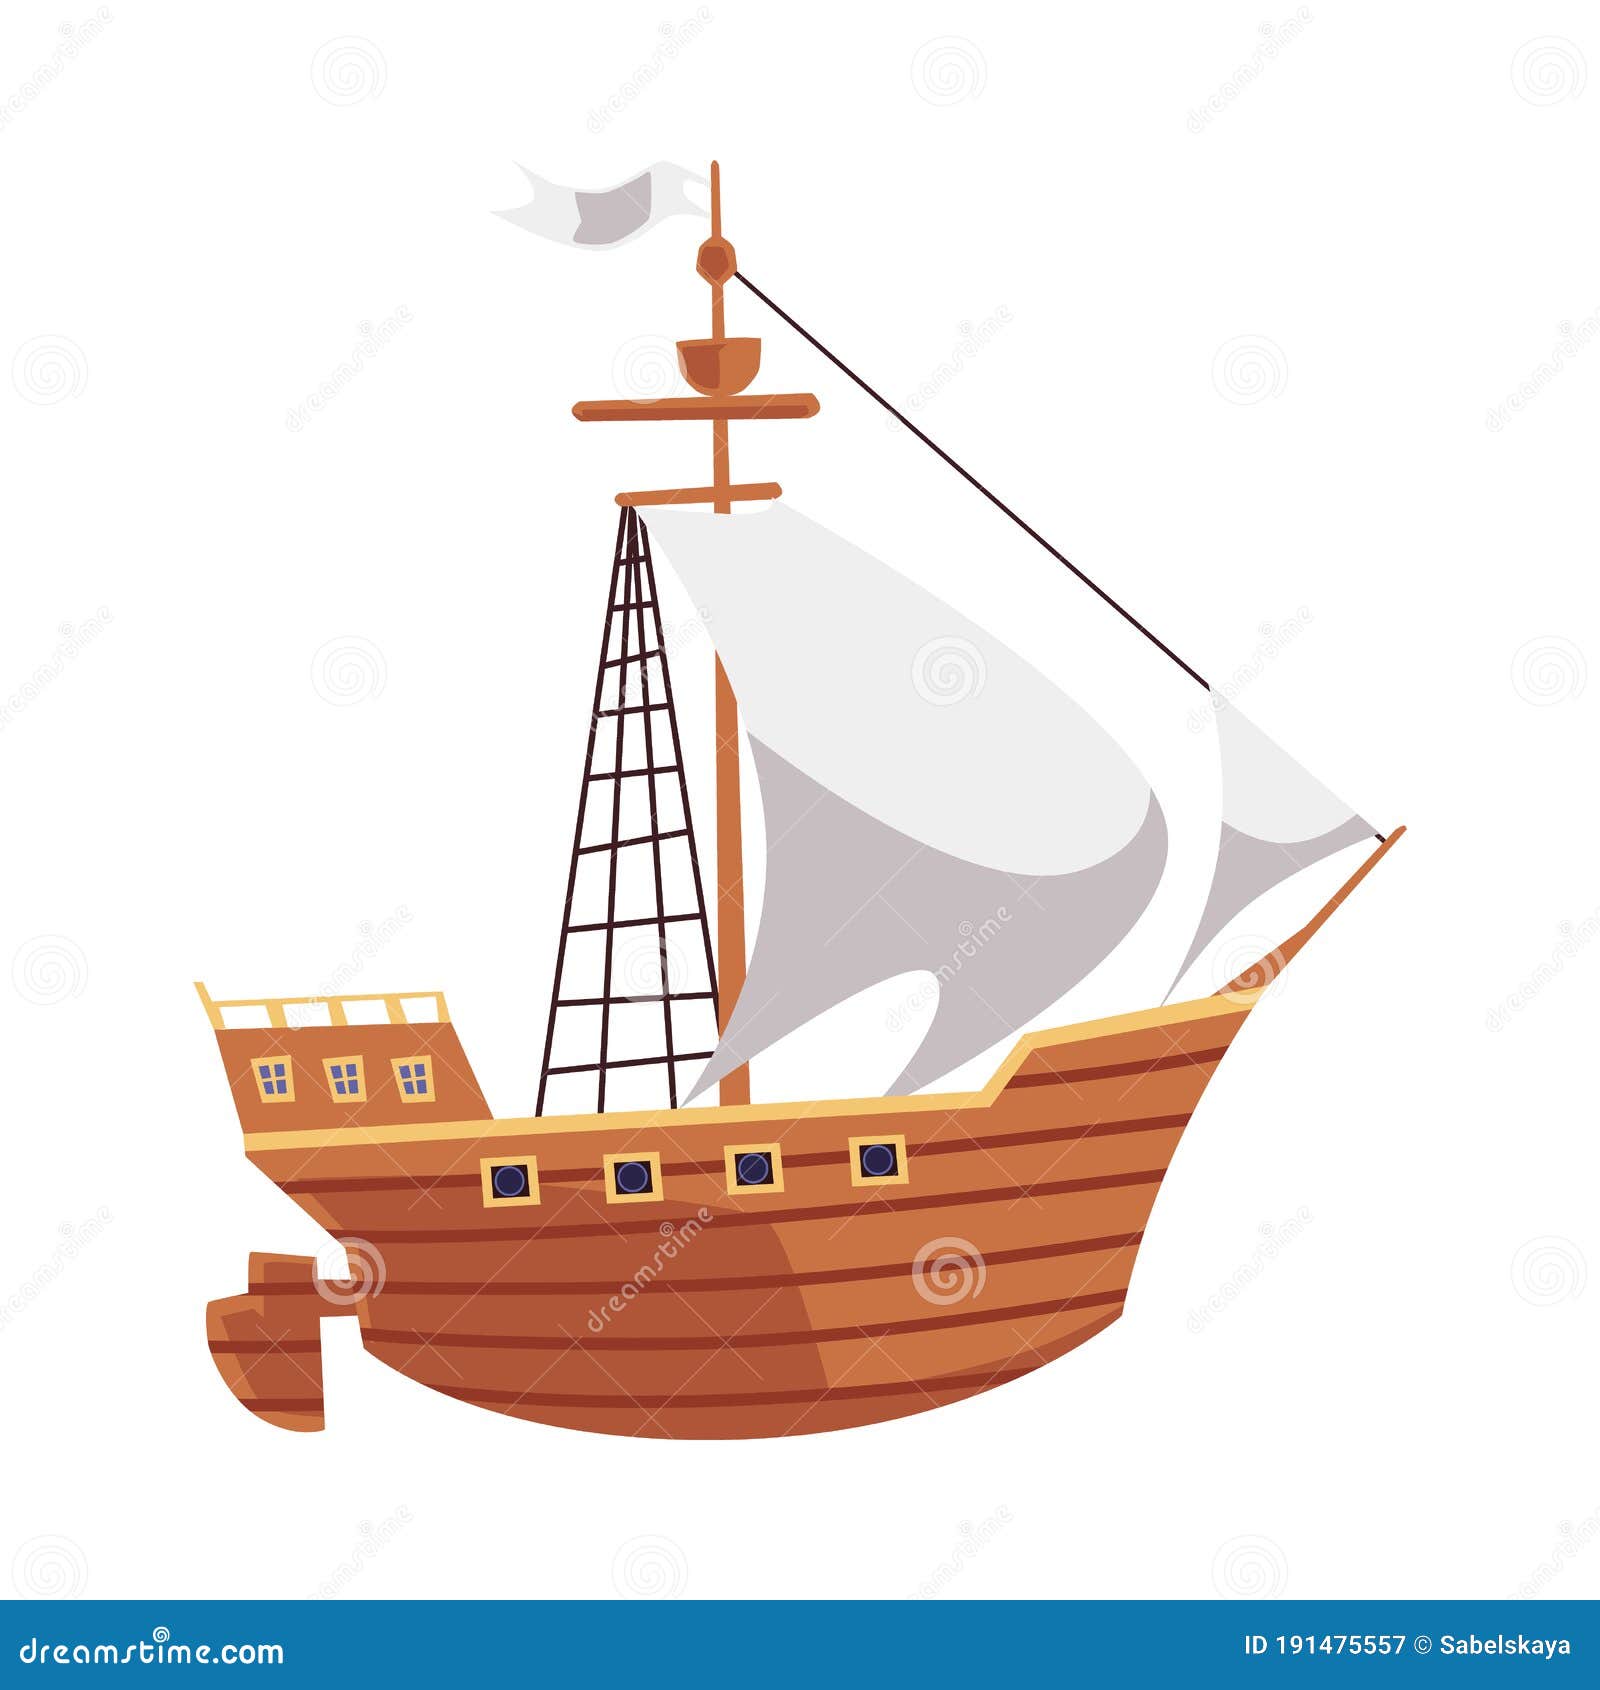 Cartoon Wooden Ship for Sea Travel with White Sails and Flag